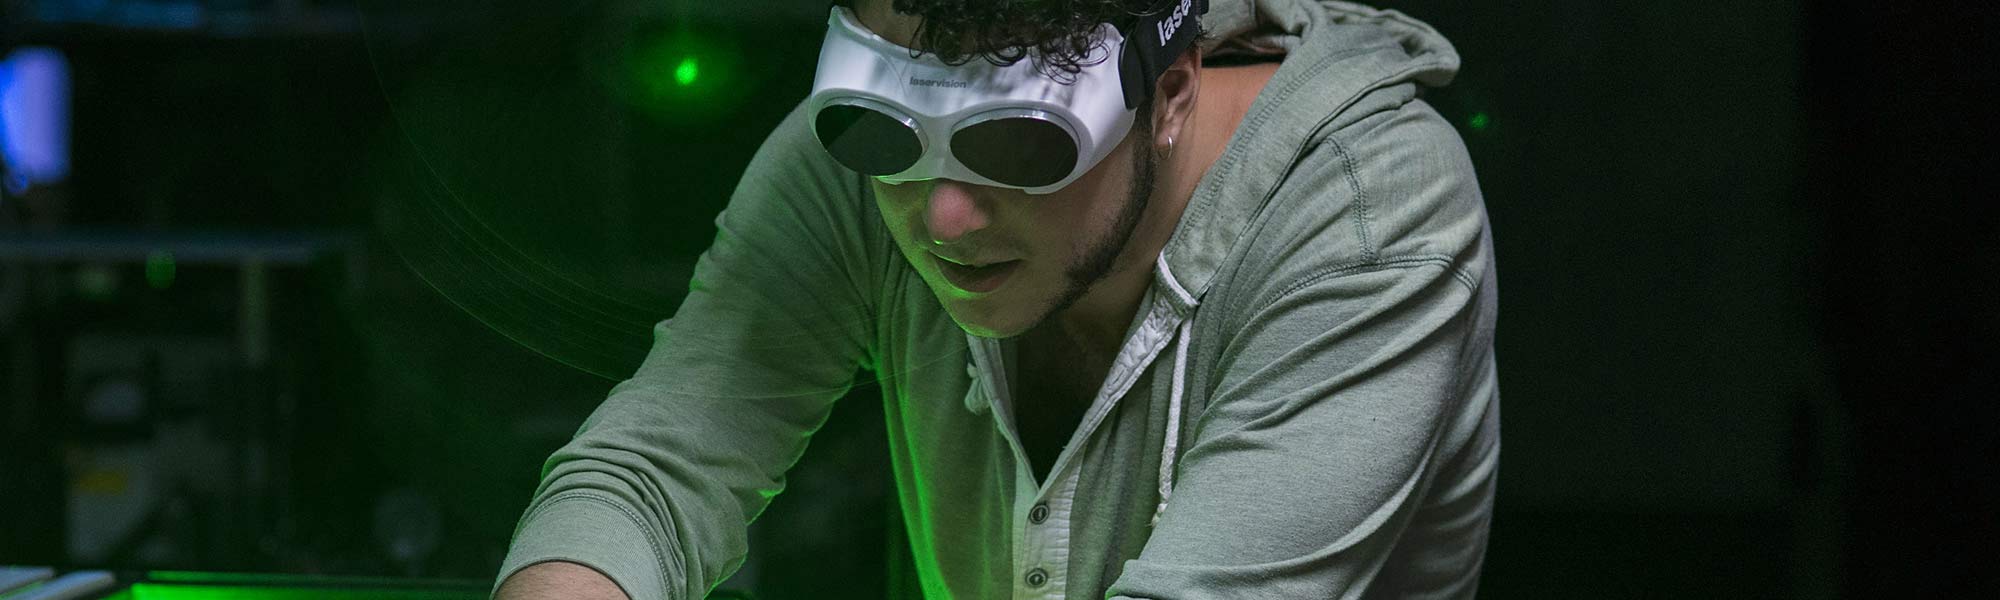 A young man wearing protective eyewear is working on something off camera. Behind him is a dark room and green light.